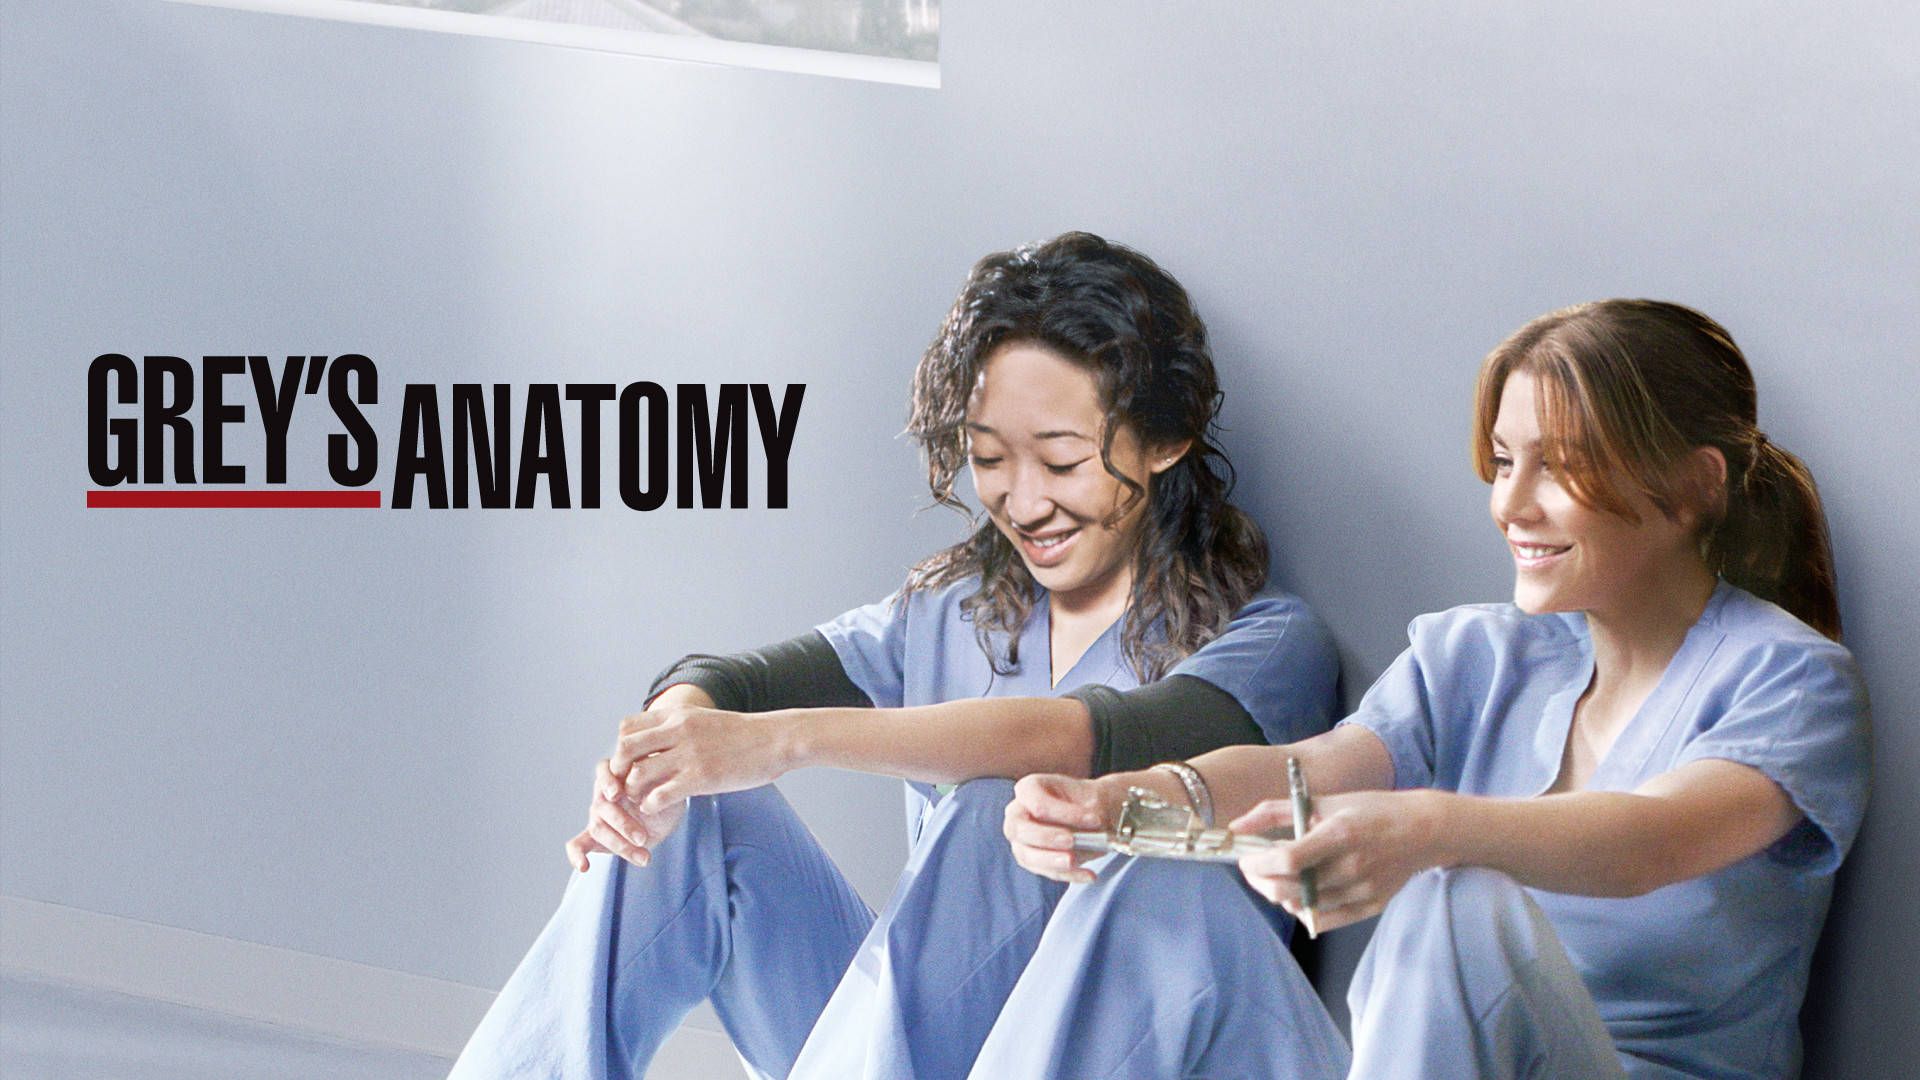 A poster for the show grey's anatomy - Grey's Anatomy